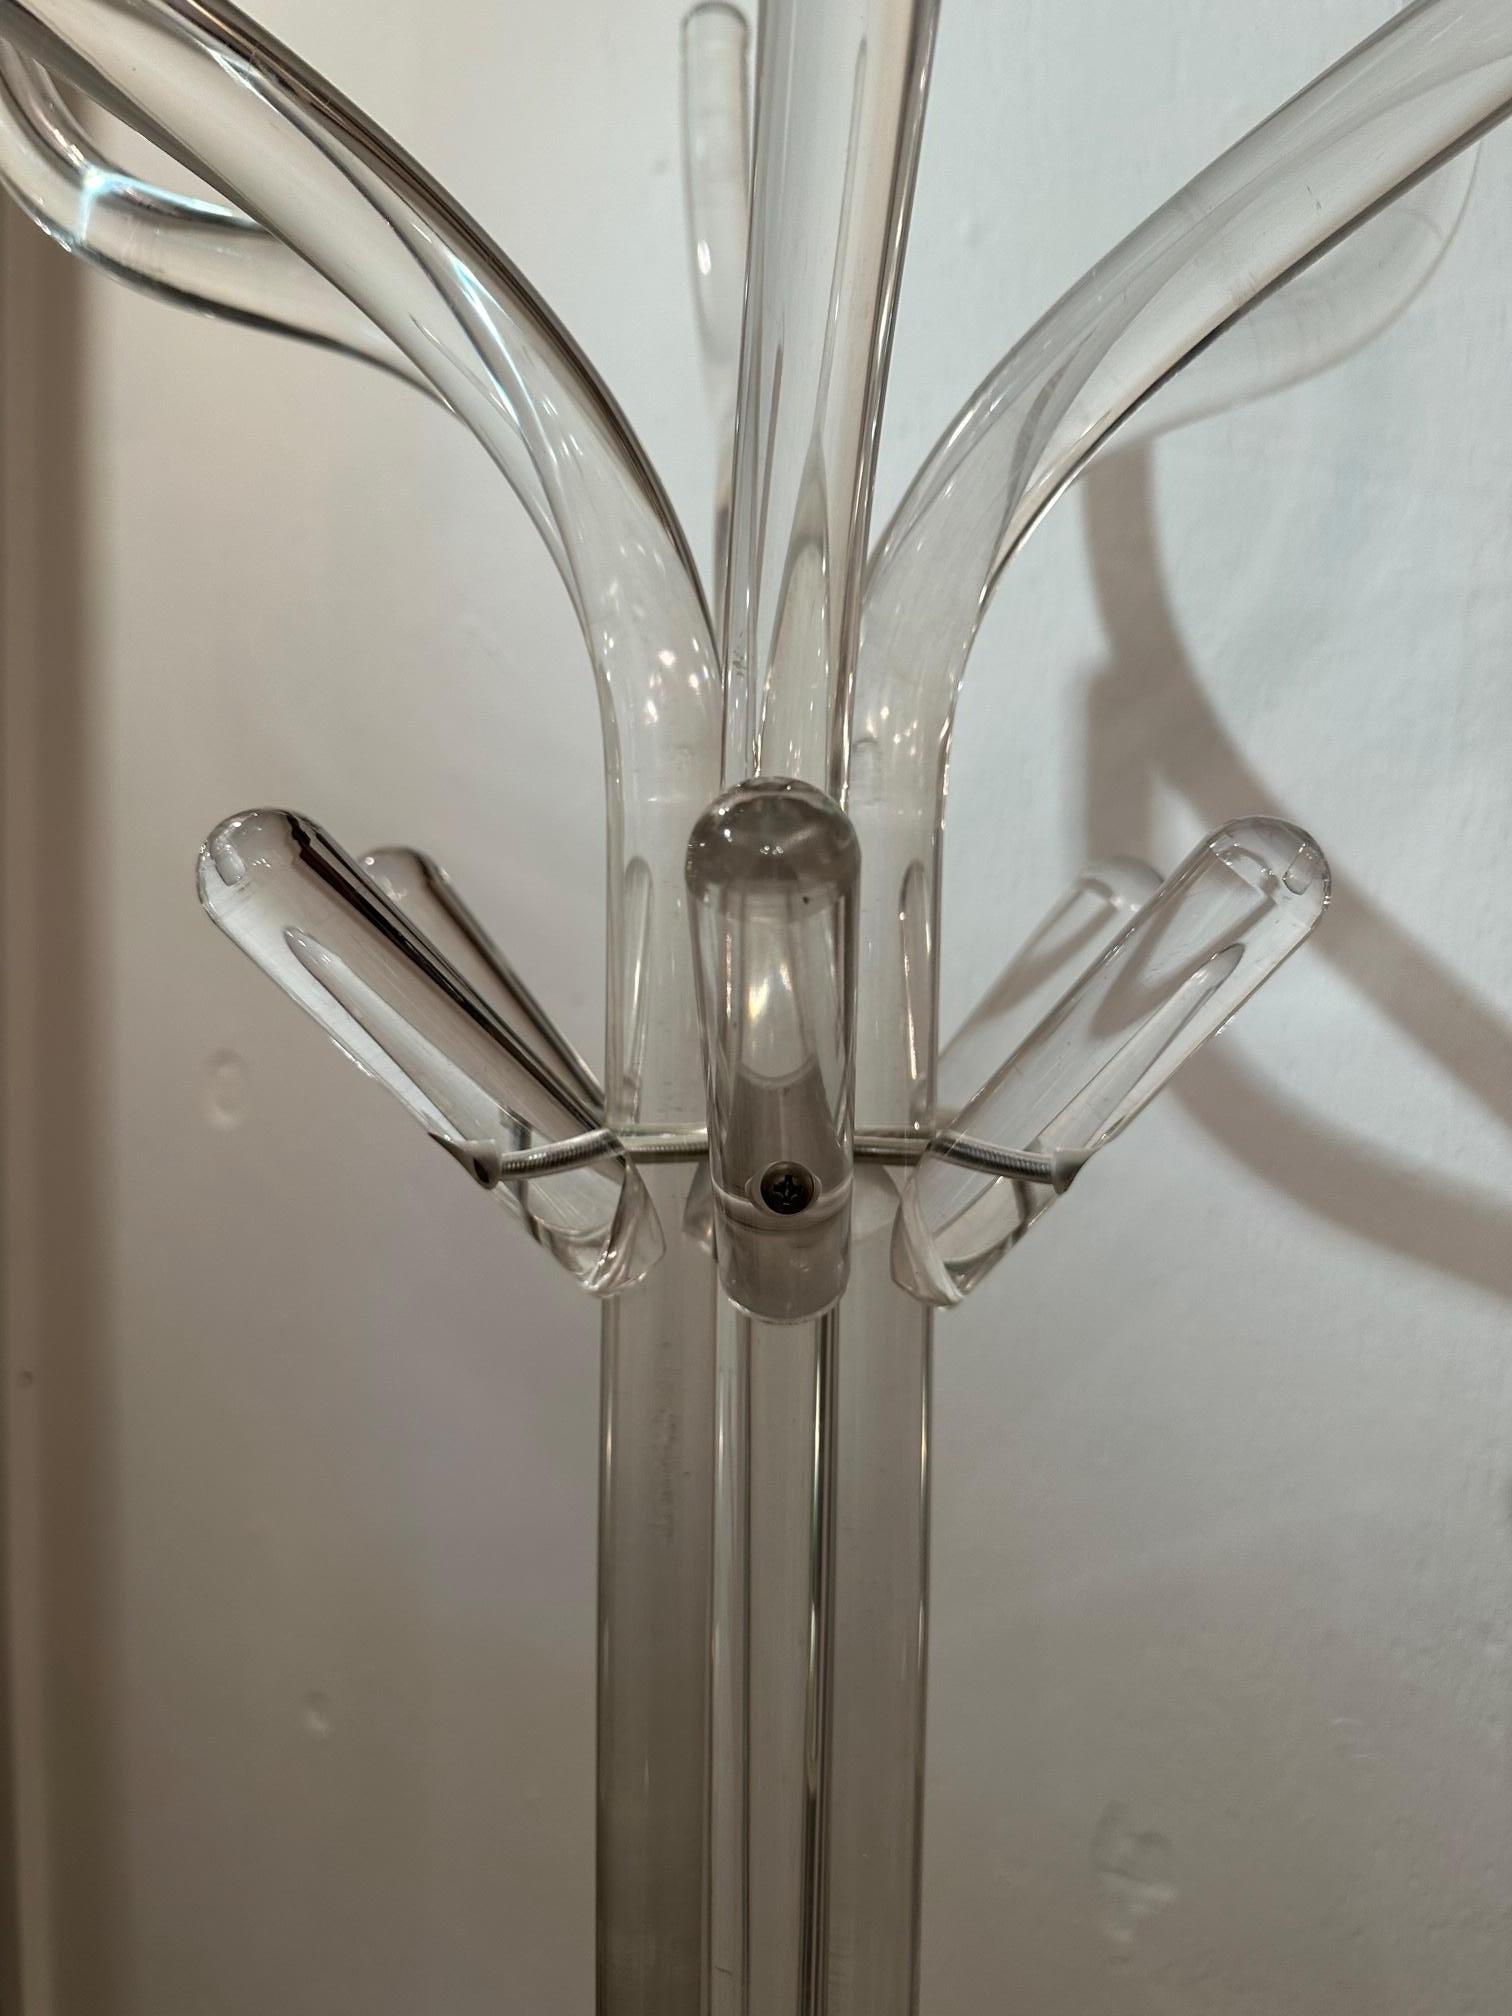 Glamorous tall lucite coat rack having beautiful shape and great function. Solid and heavy so can handle afew coats at a time.
Base 24” diameter
Top 21” diameter.